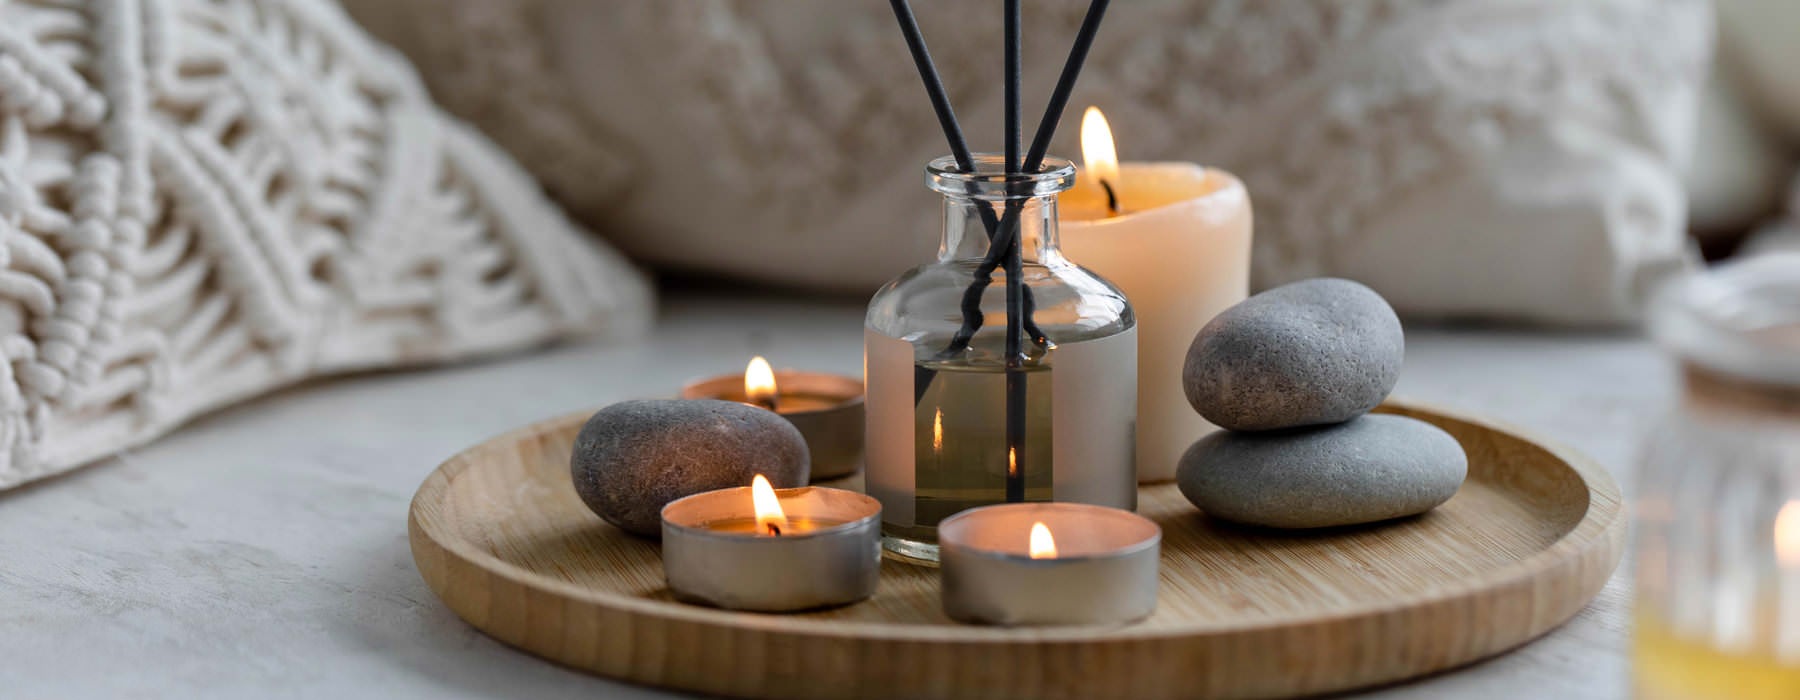 candles, stones and infused reeds on a wooden plate 